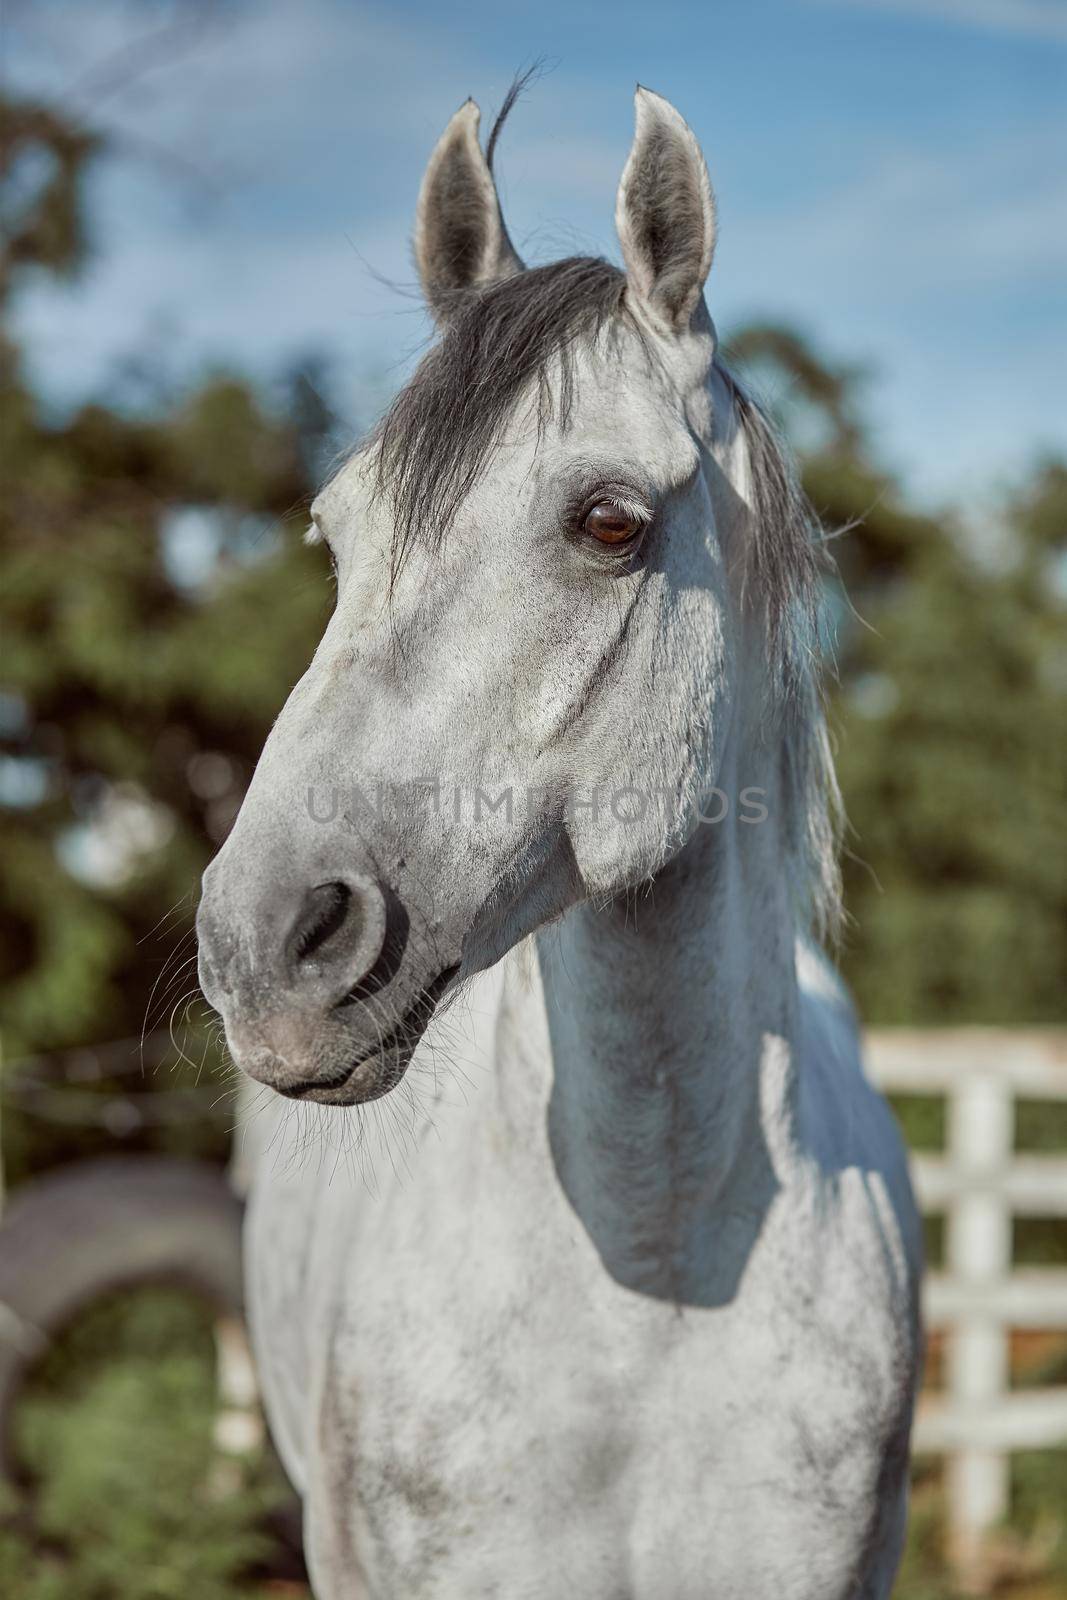 Beautiful grey horse in White Apple, close-up of muzzle, cute look, mane, background of running field, corral, trees. Horses are wonderful animals